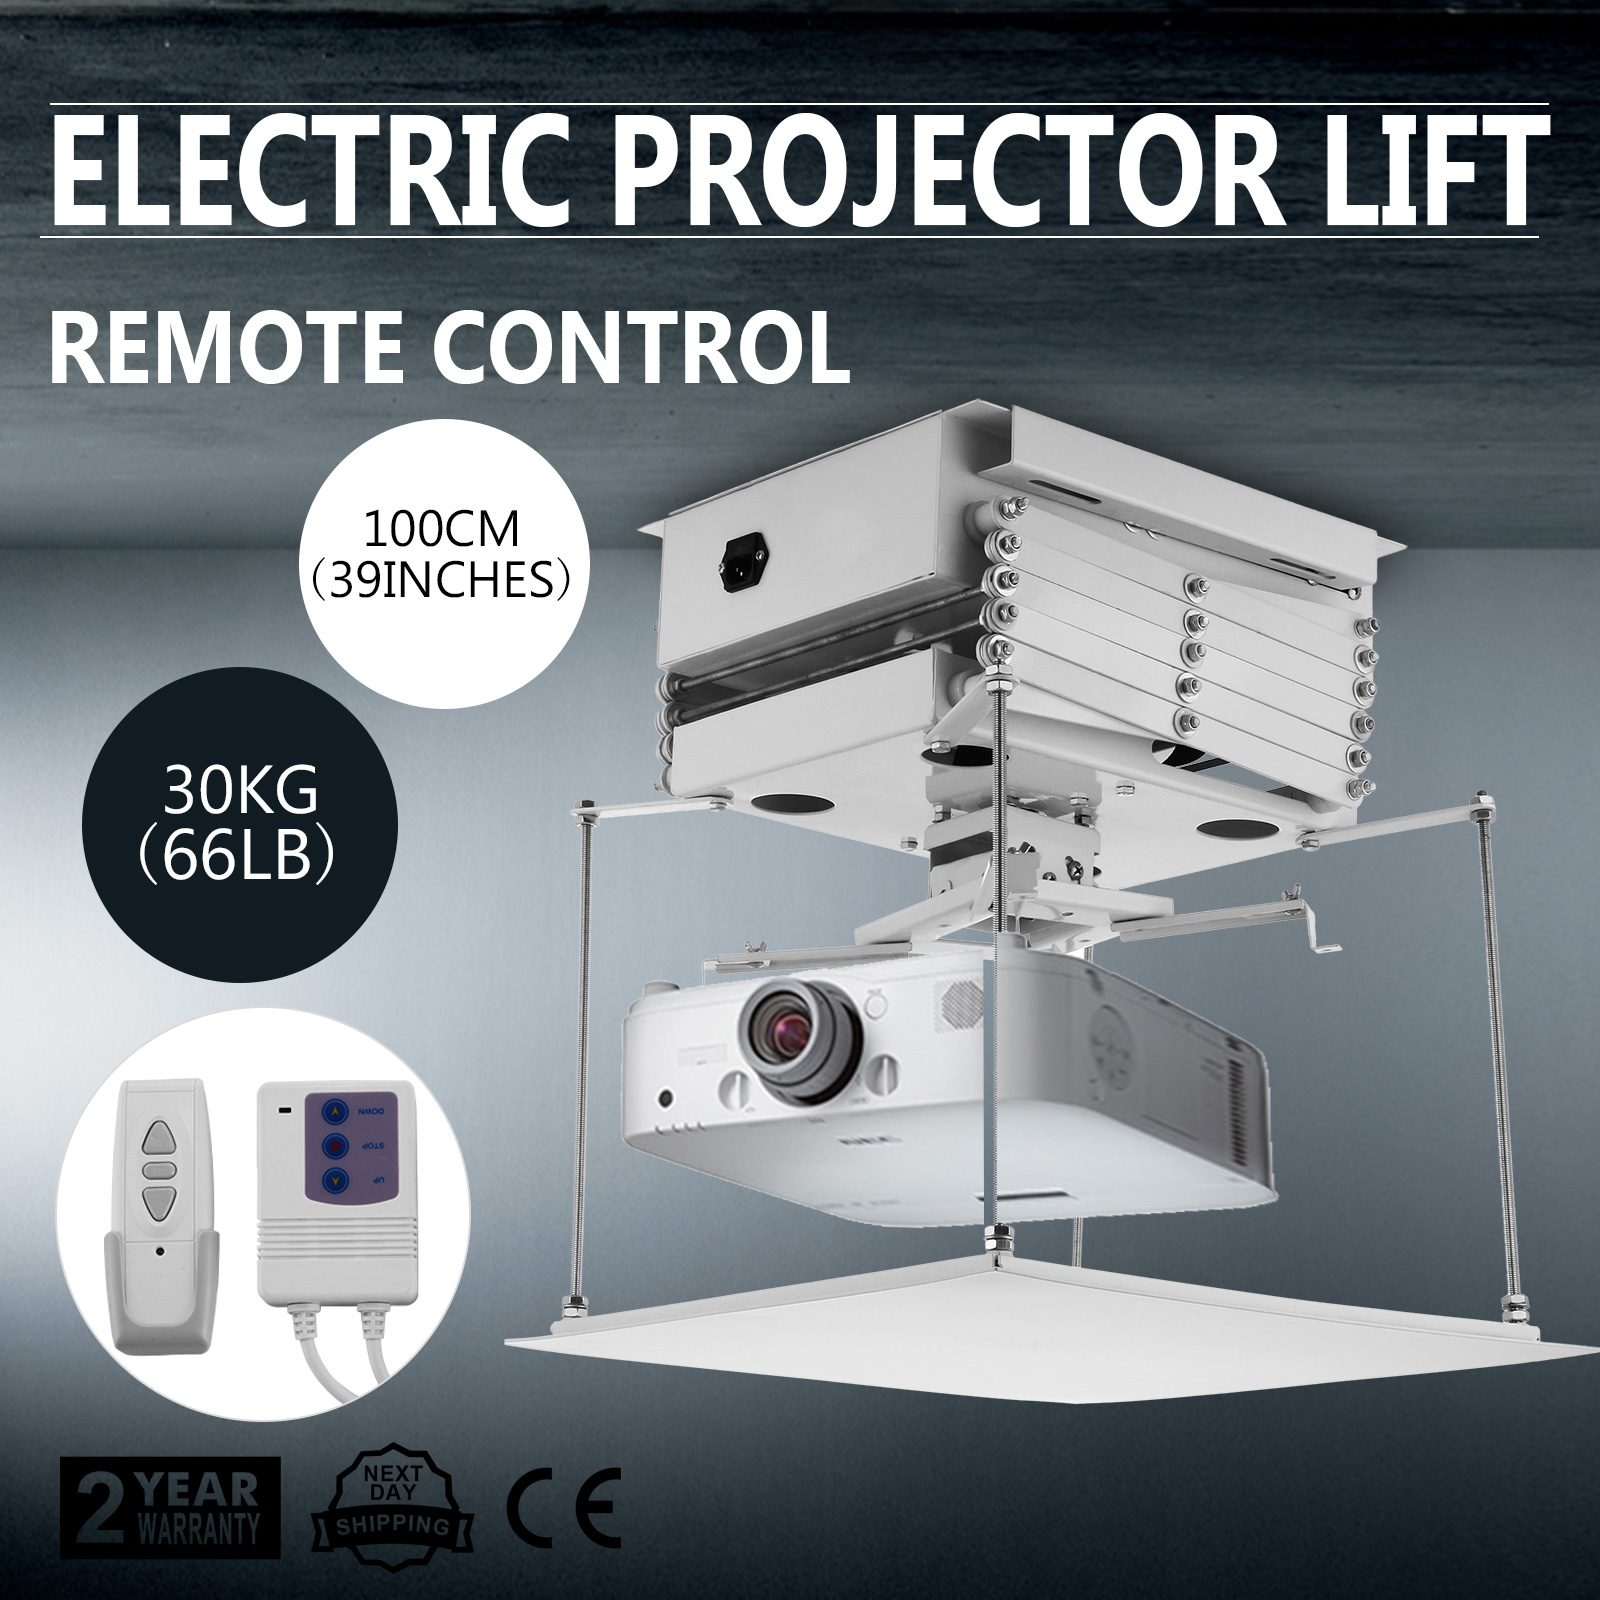 Details About Quality Motorized Remote Control Electric Scissors Projector Lift Ceiling Mount